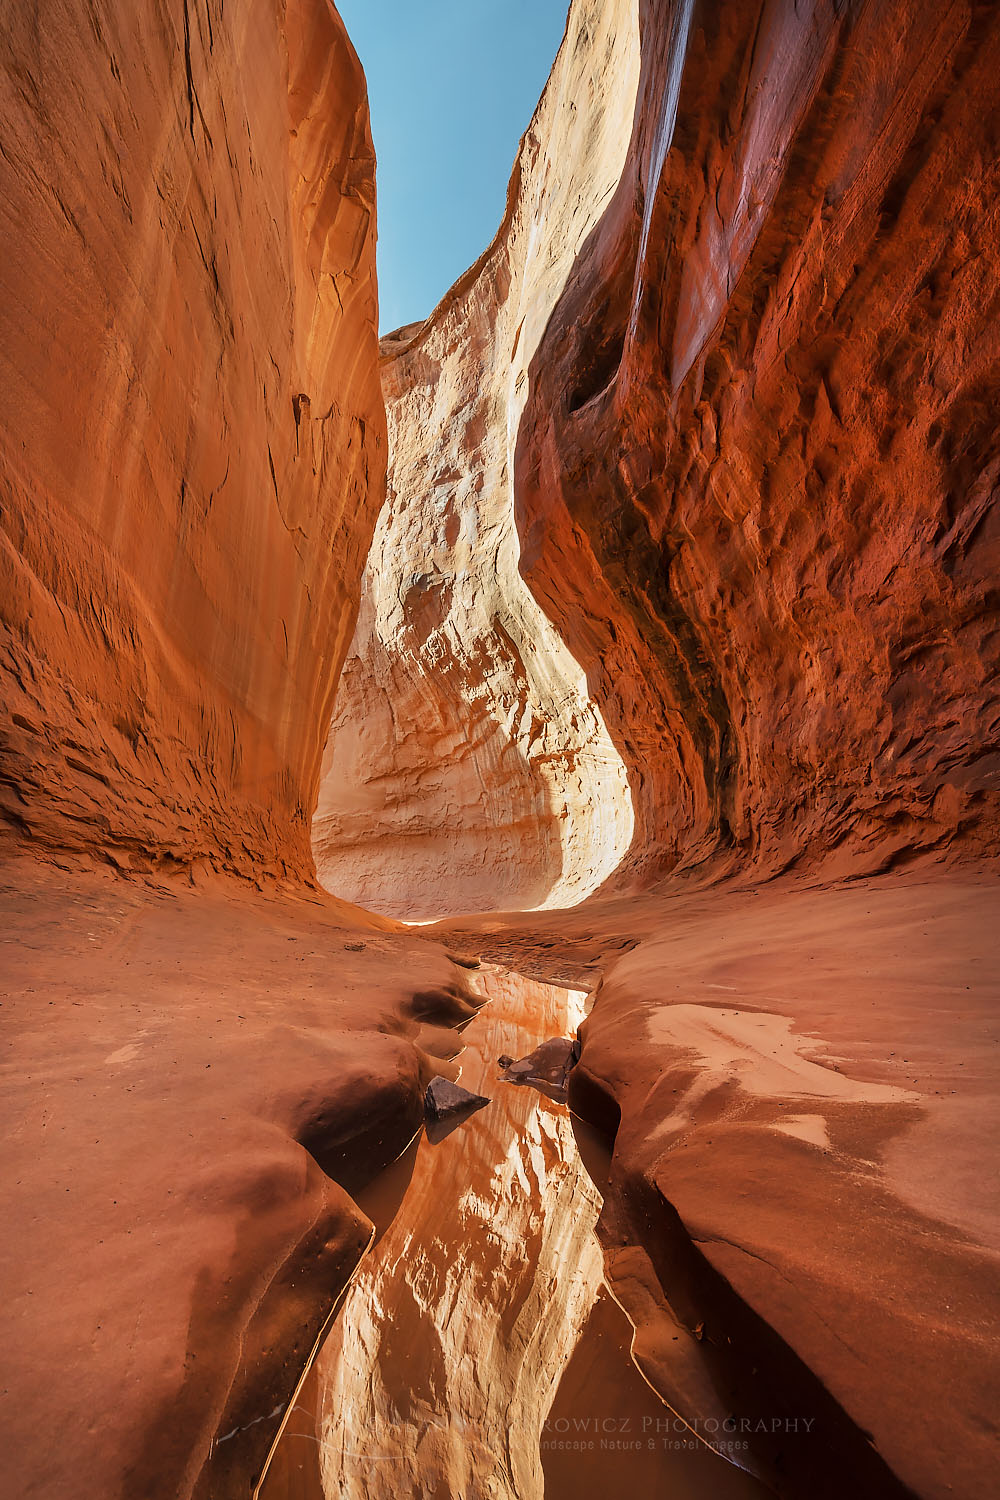 Leprechaun Canyon, one of a group of canyons called the Irish Canyons near Hanksville Utah #74995